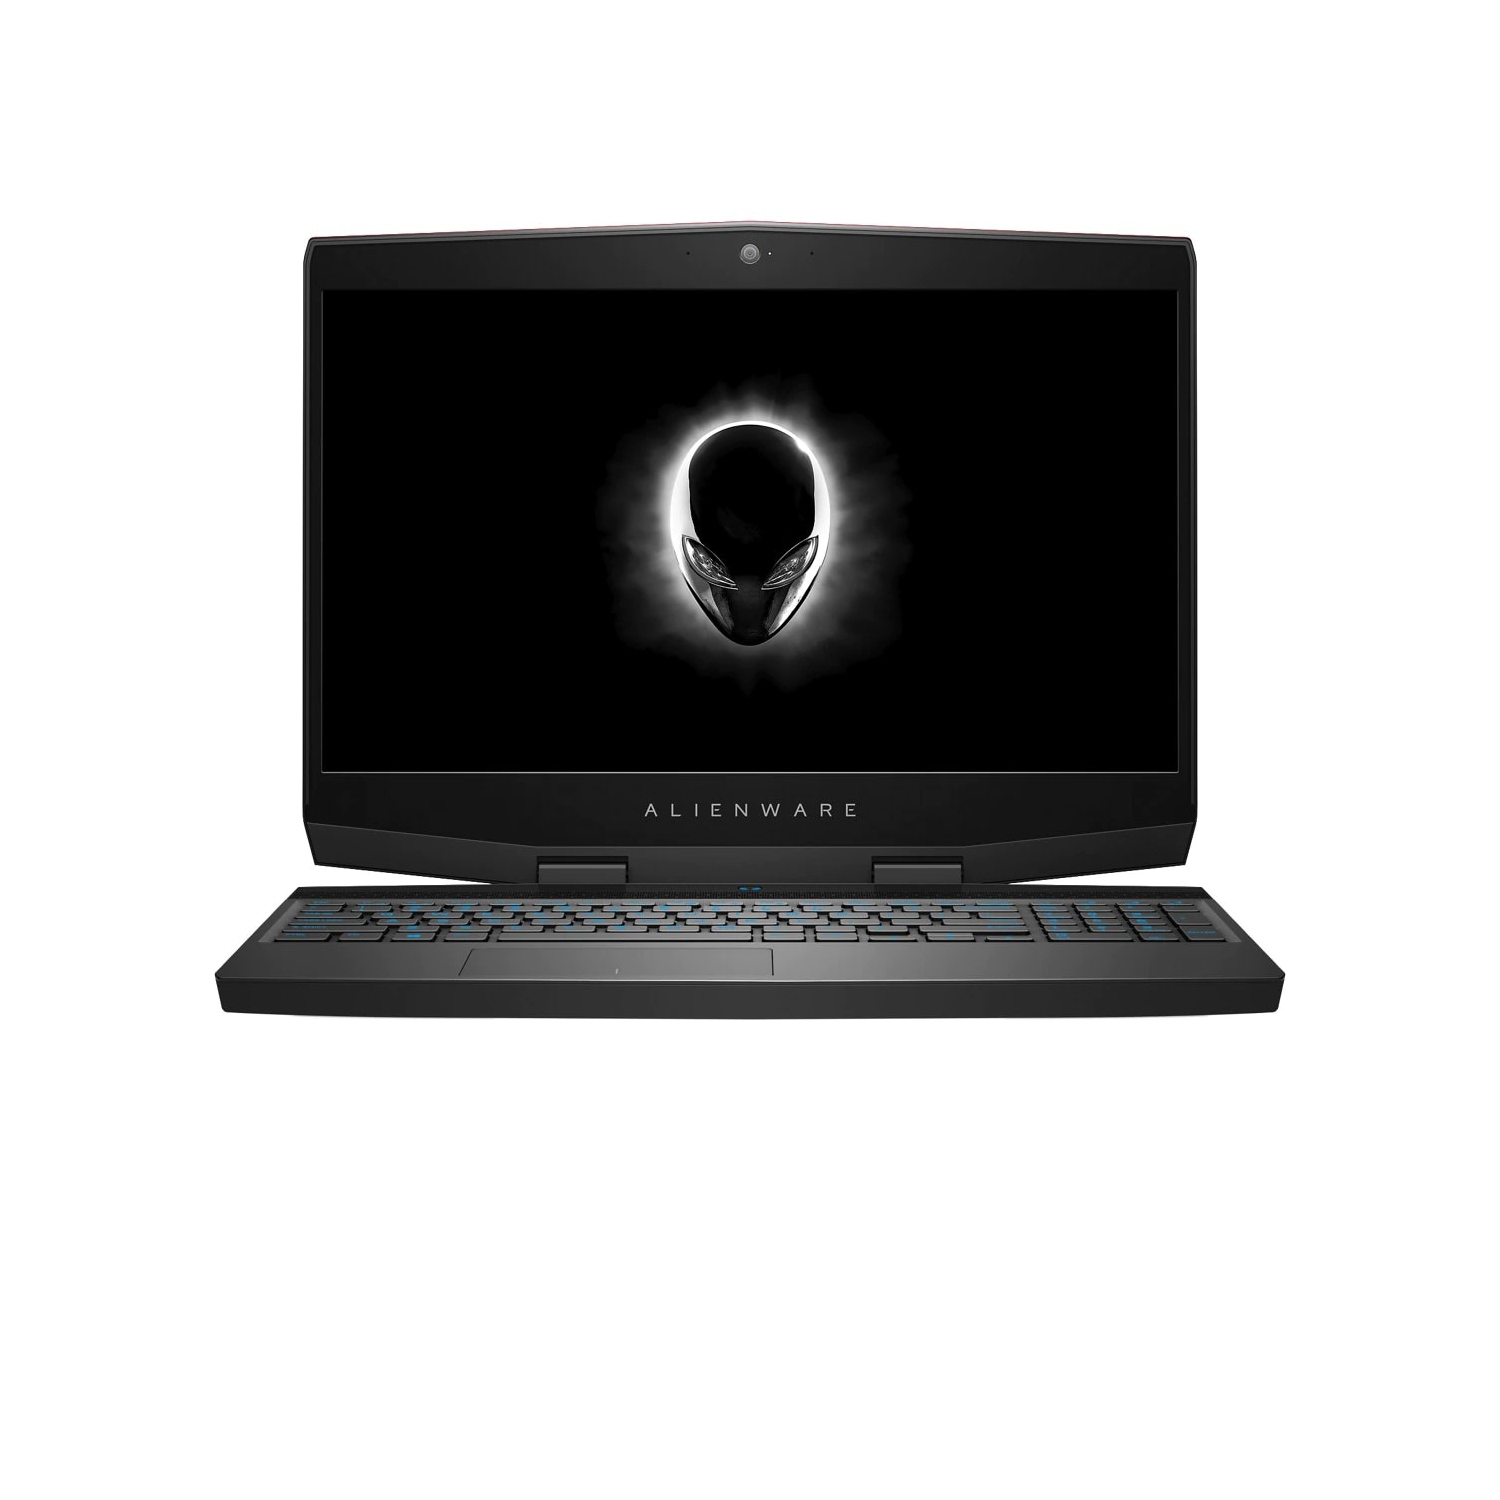 Refurbished (Excellent) - Dell Alienware m15 Gaming Laptop (2018) | 15.6" FHD | Core i7 - 512GB SSD - 16GB RAM - RTX 2070 | 6 Cores @ 4.5 GHz Certified Refurbished